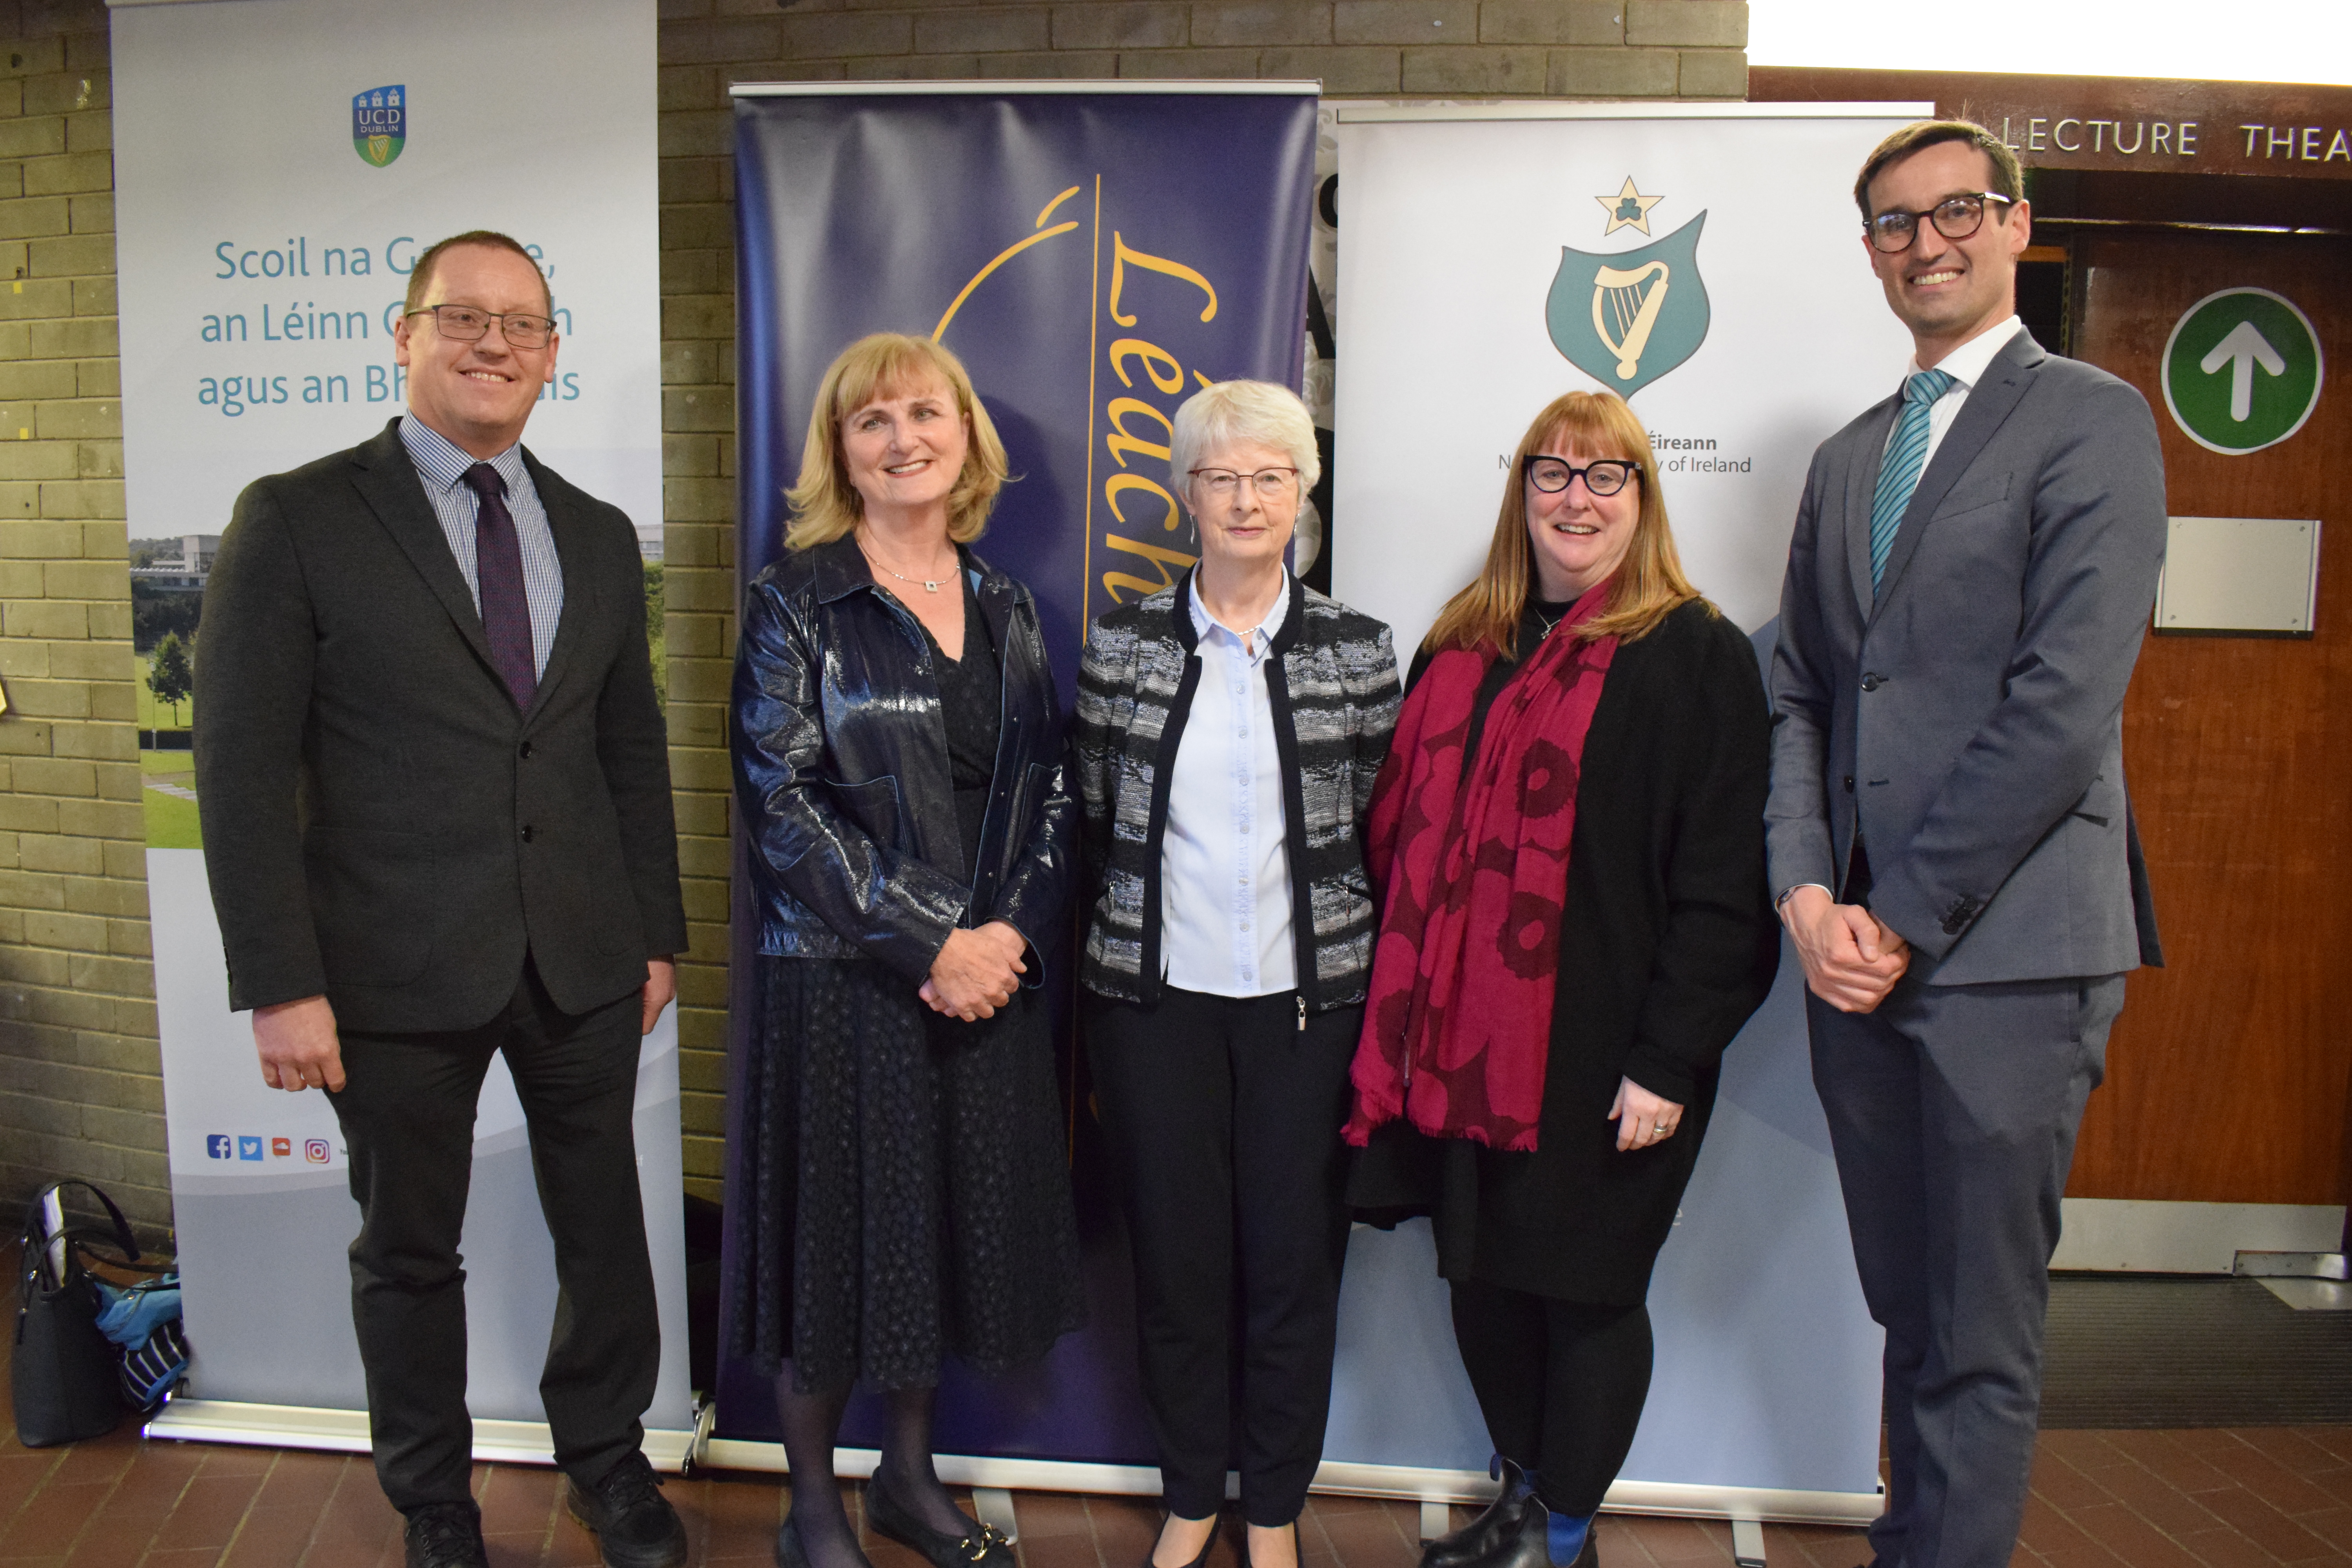 Dr Patrick O'Leary, NUI Registrar; Prof Regina Uí Chollatáin, Senior Professor and Chair of Modern Irish in the UCD School of Irish, Celtic Studies and Folklore; Dr Mary Harris; Dr Kelly Fitzgerald and Dr Conor Mulvagh, UCD.